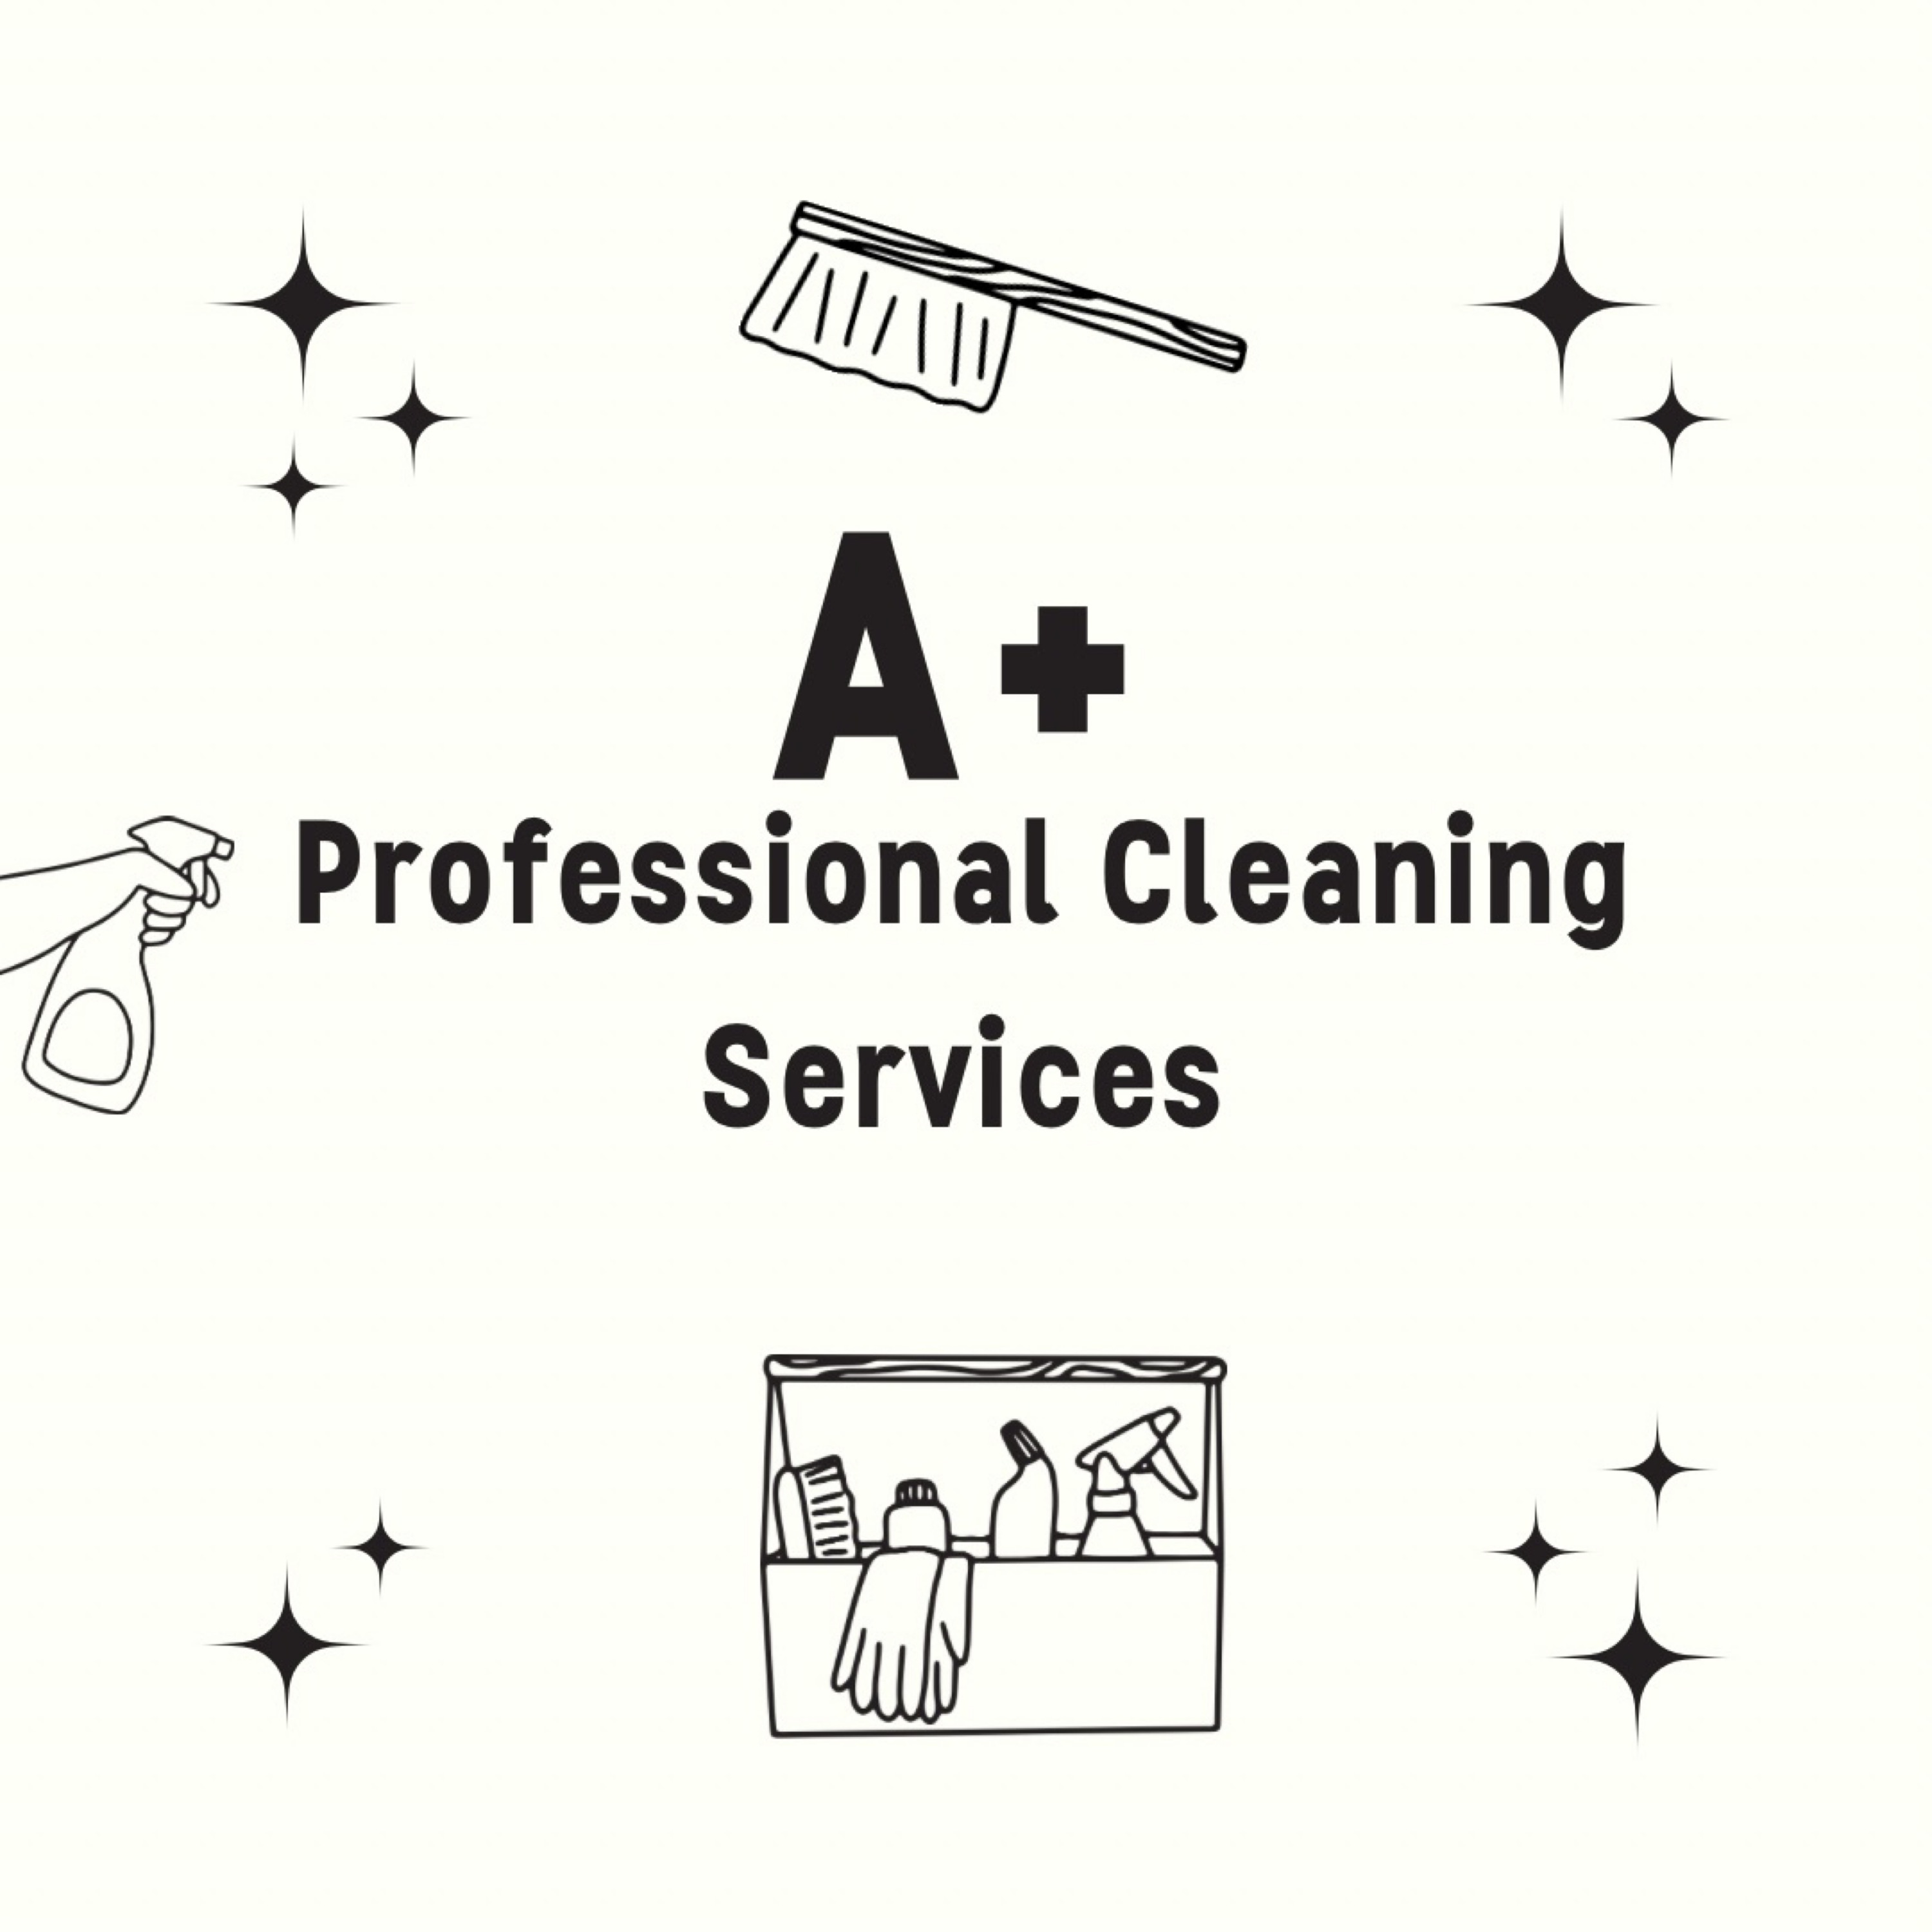 A+ Professional Cleaning Services Logo